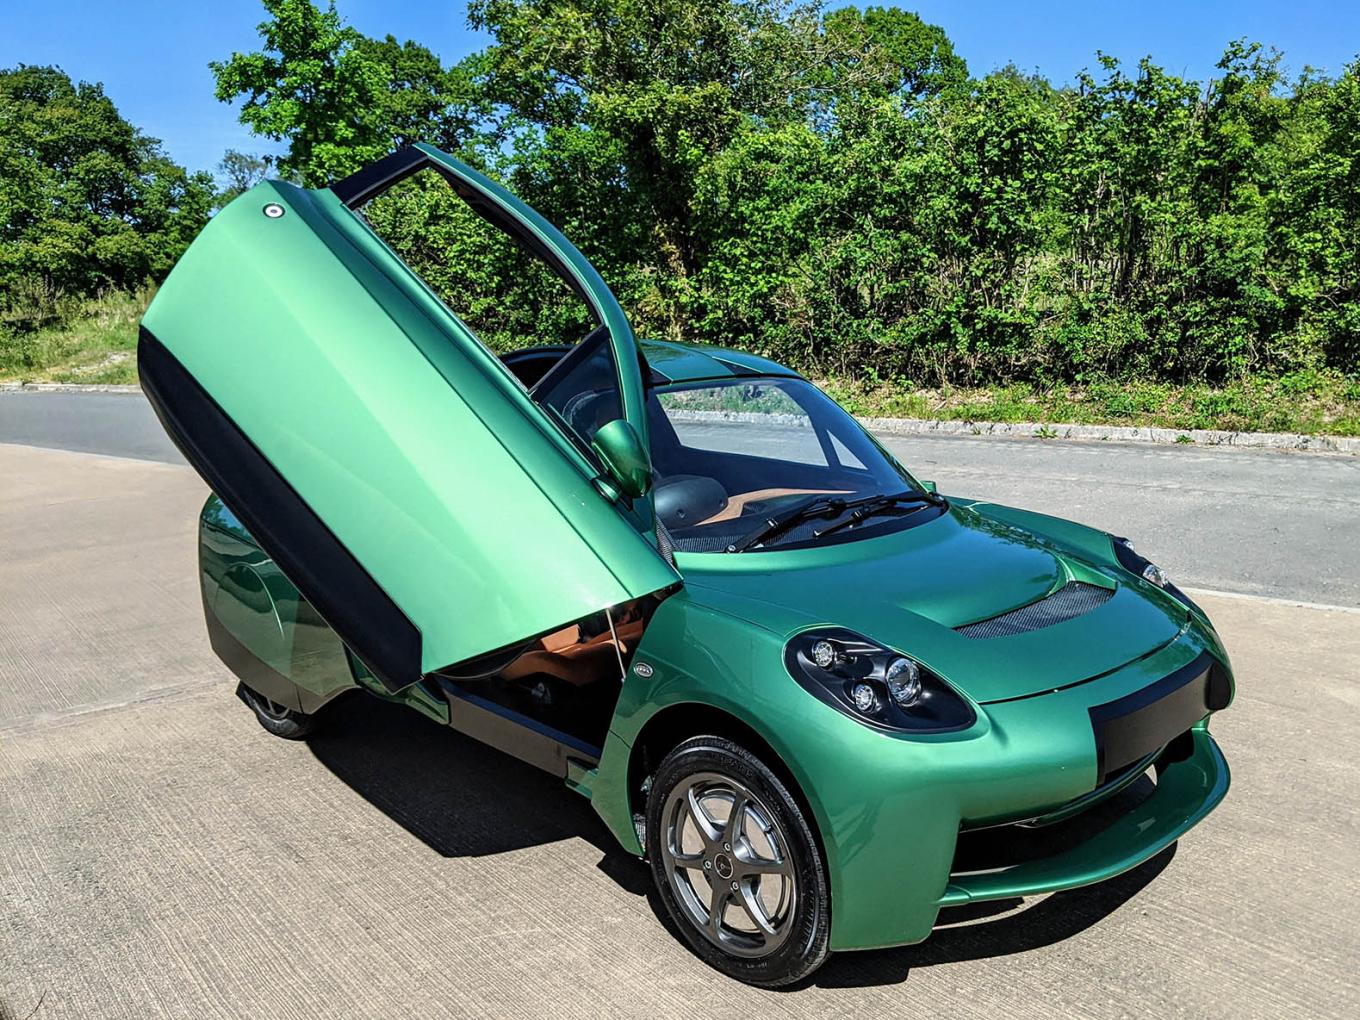 A green electric car designed and made by Riversimple Movement